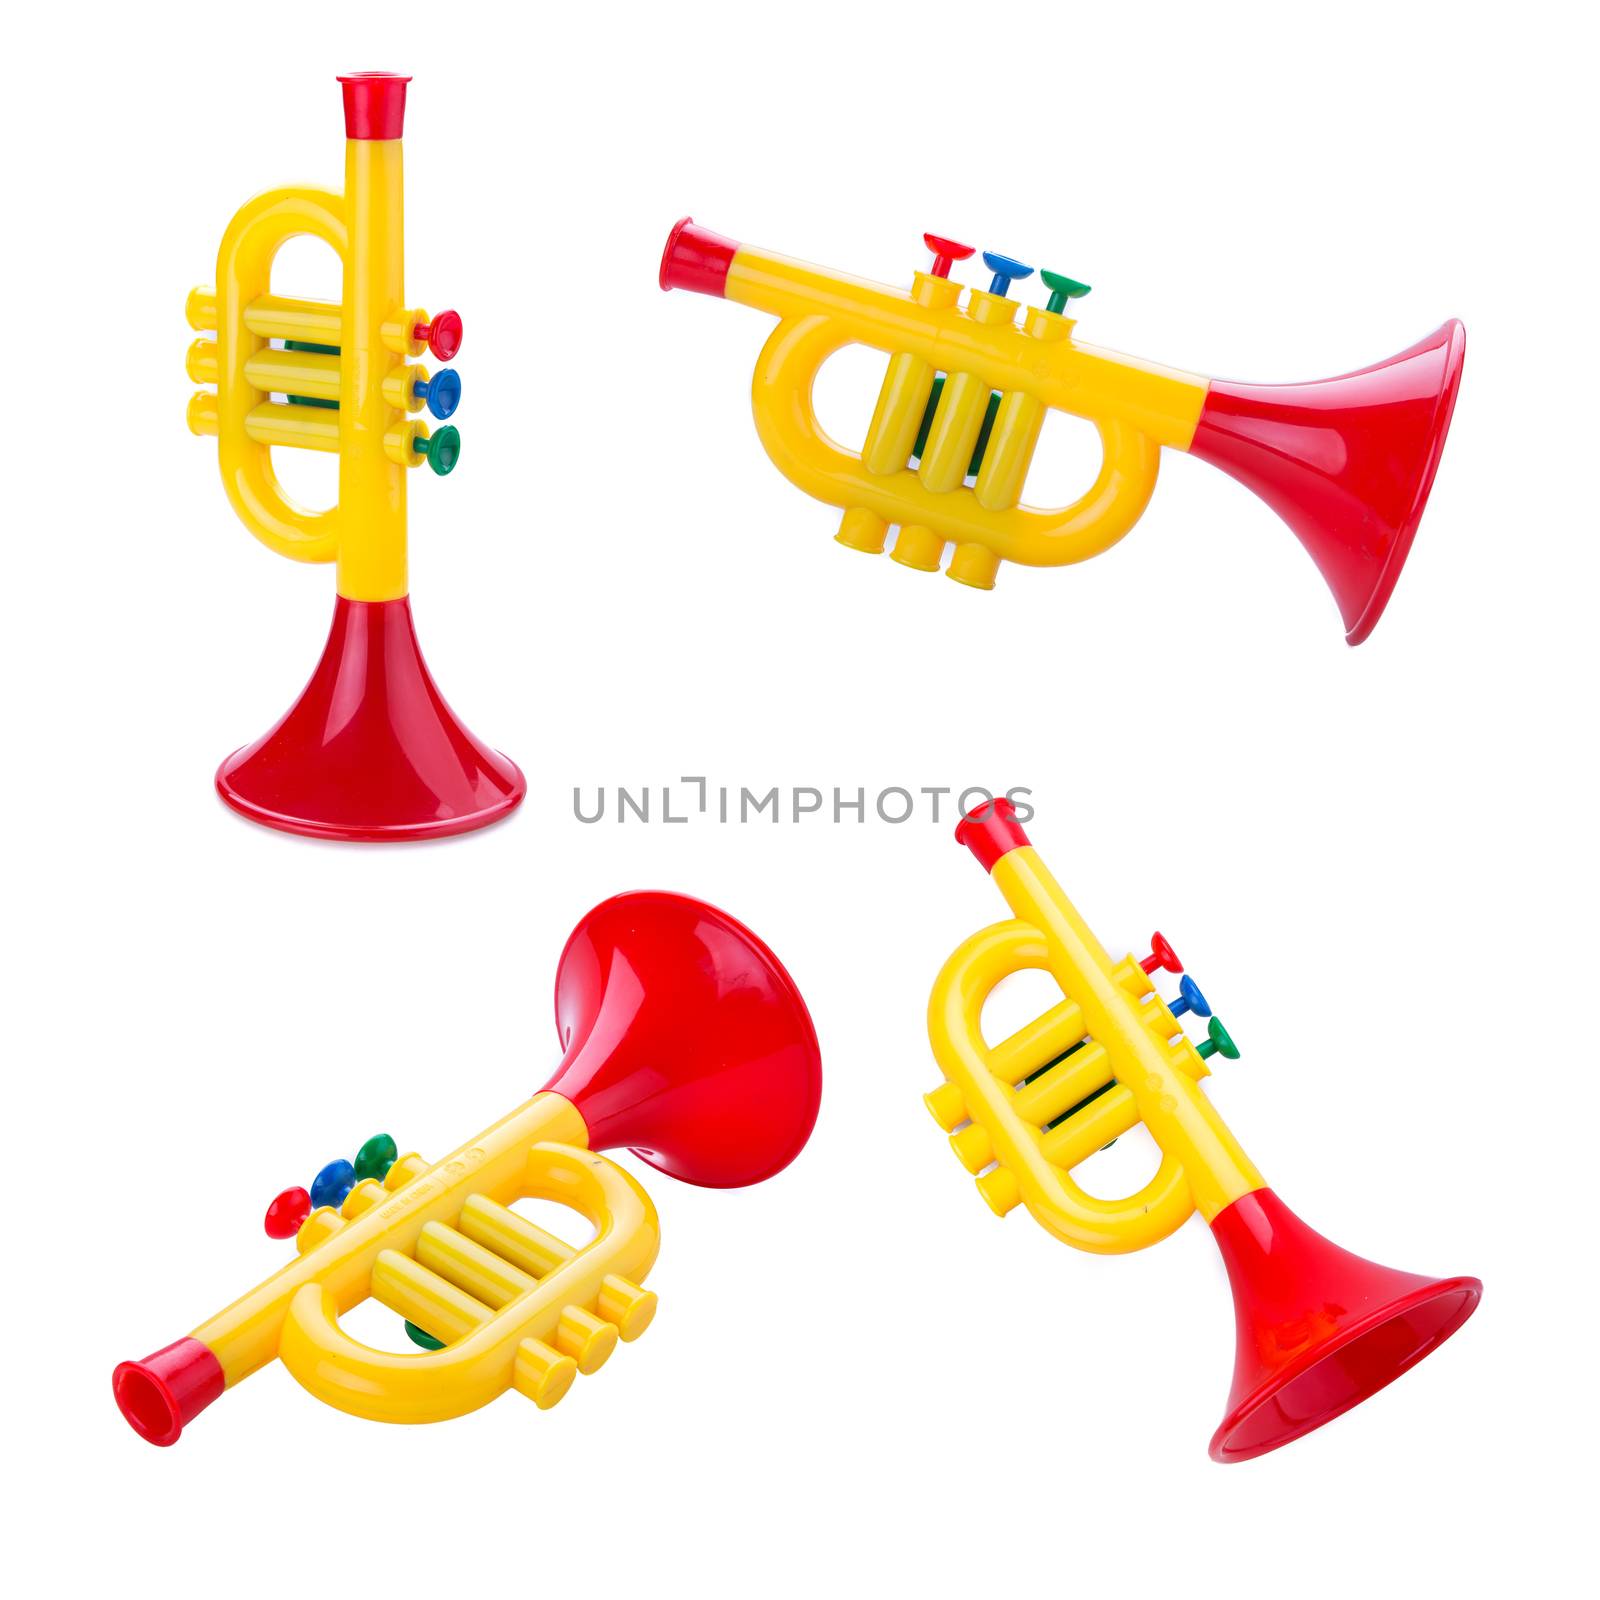 Trumpet toy for kids isolated on white background